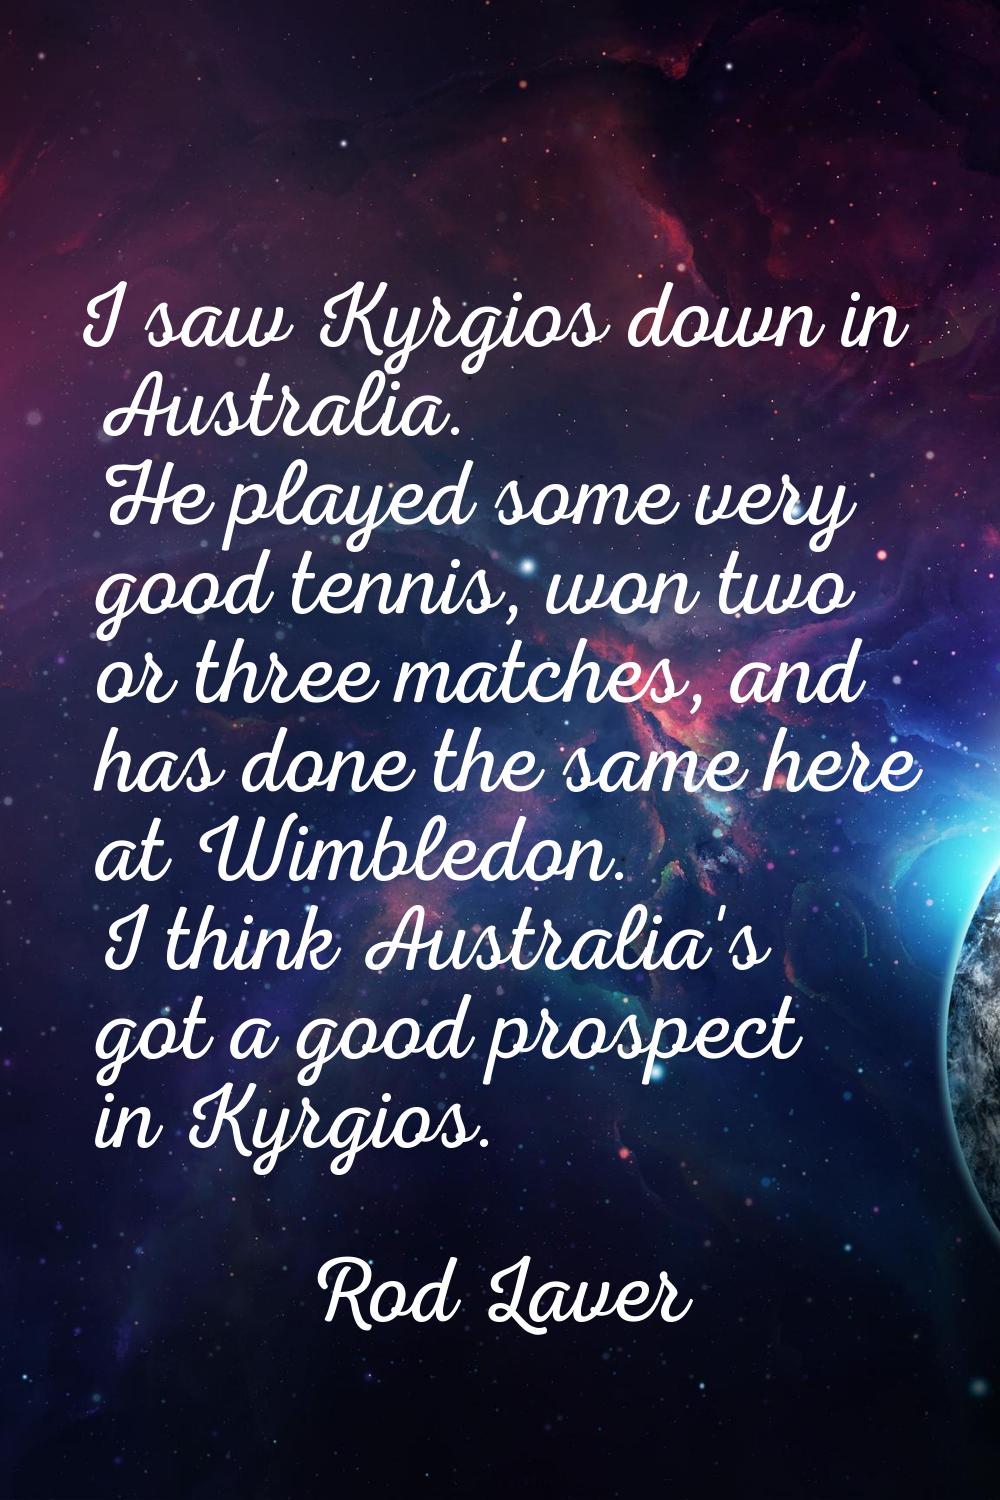 I saw Kyrgios down in Australia. He played some very good tennis, won two or three matches, and has